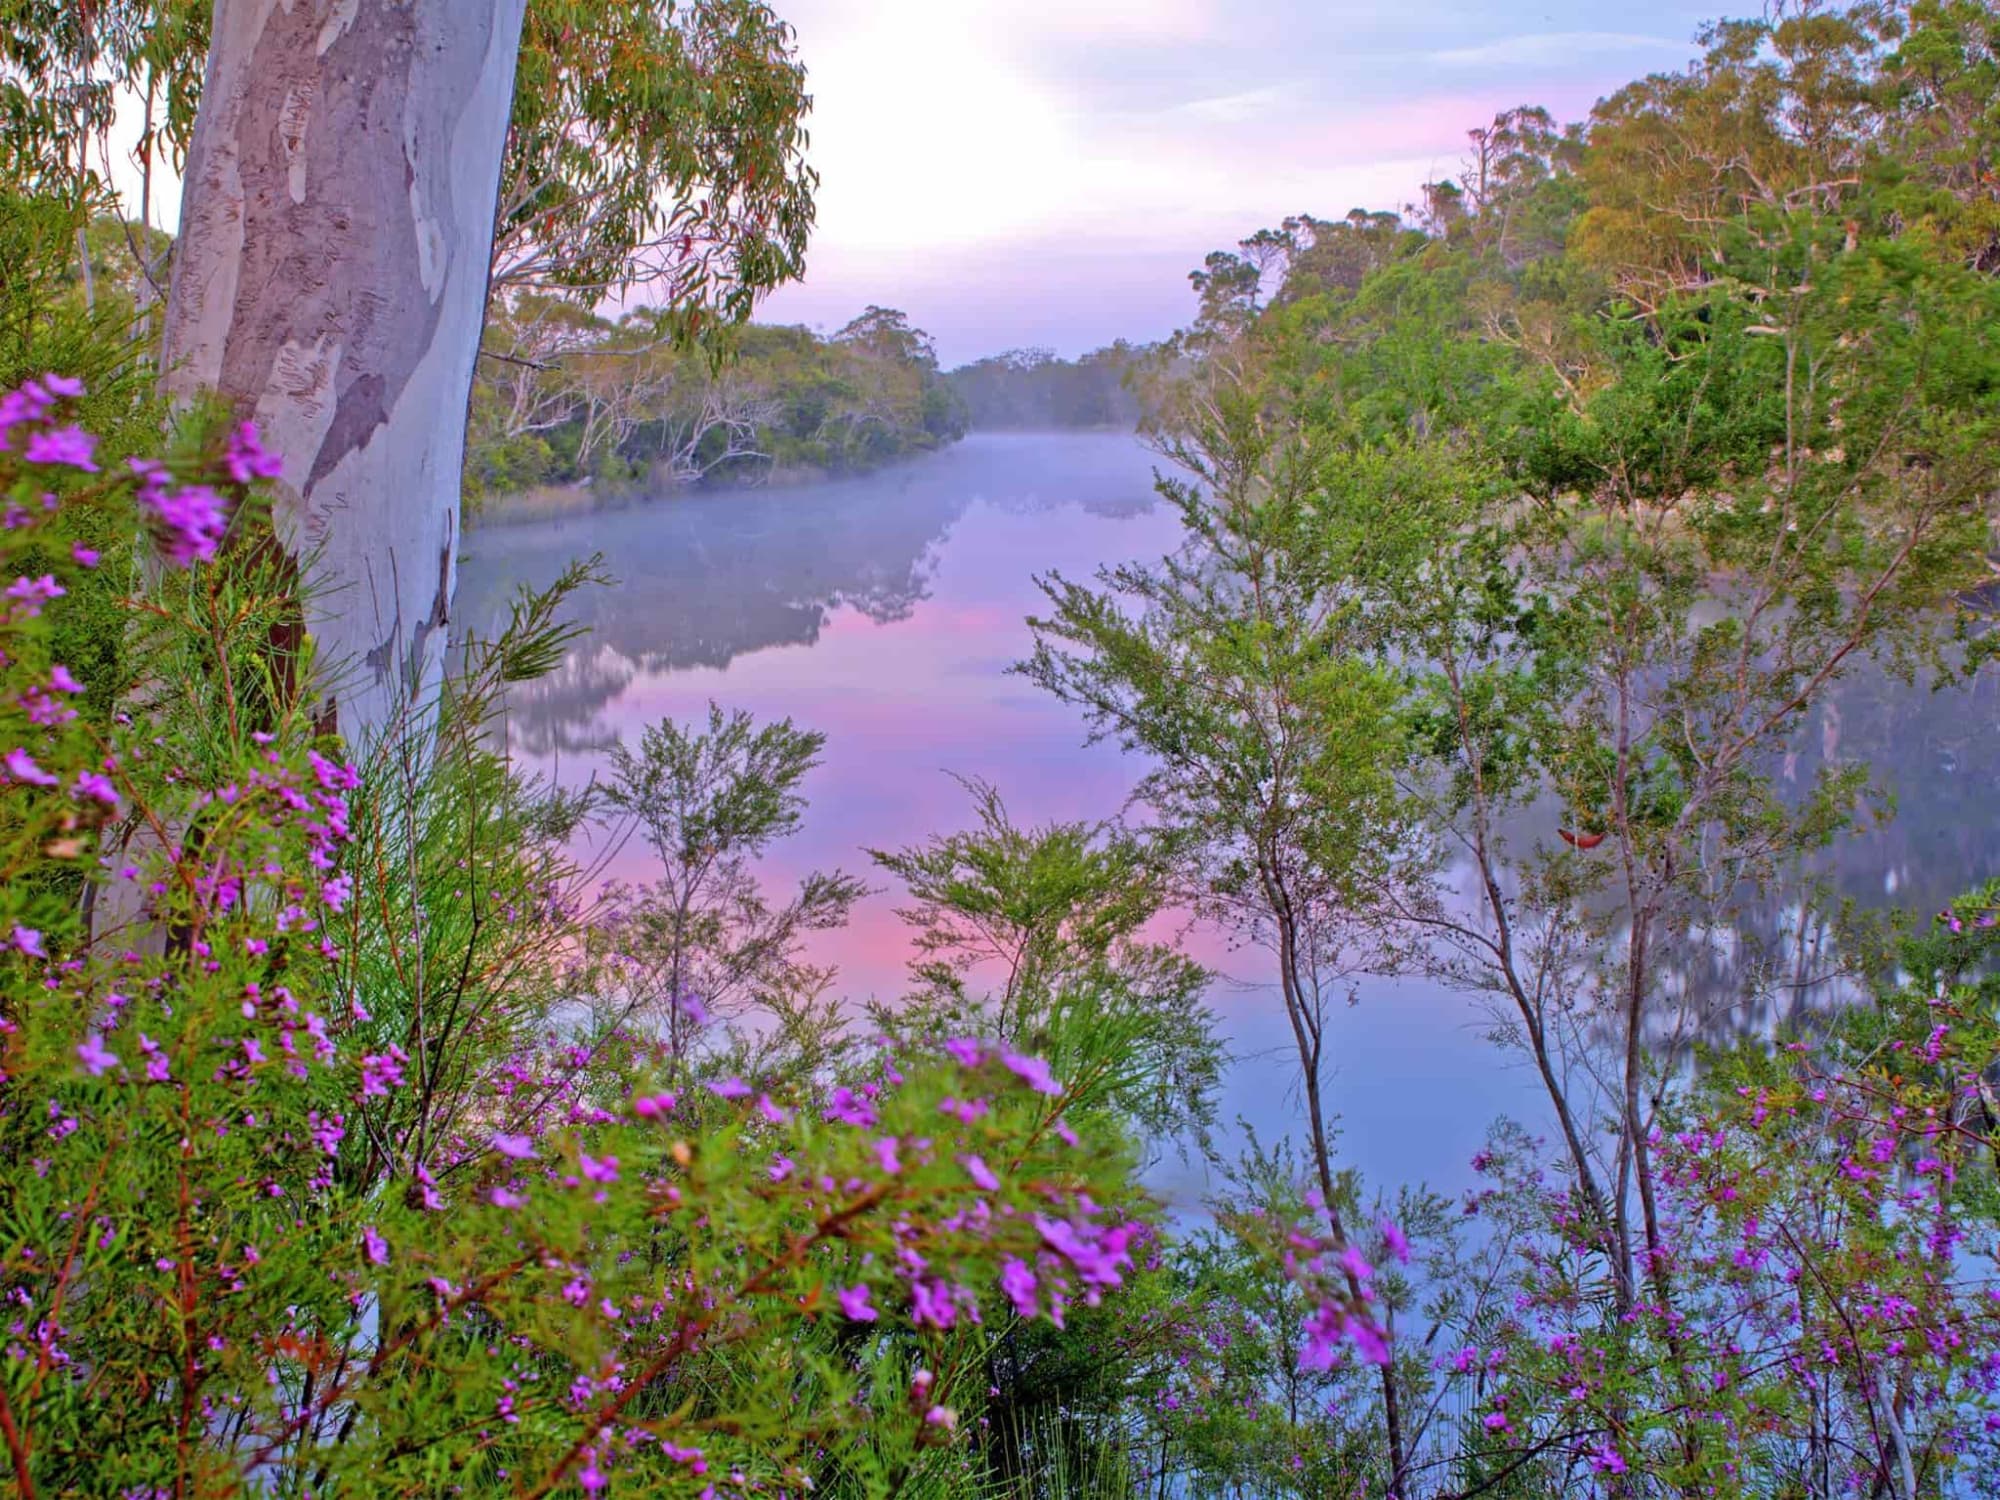 Don't miss sunrise over the Noosa River at Dutgee walkers' camp by Rob Cameron QLD GOVT